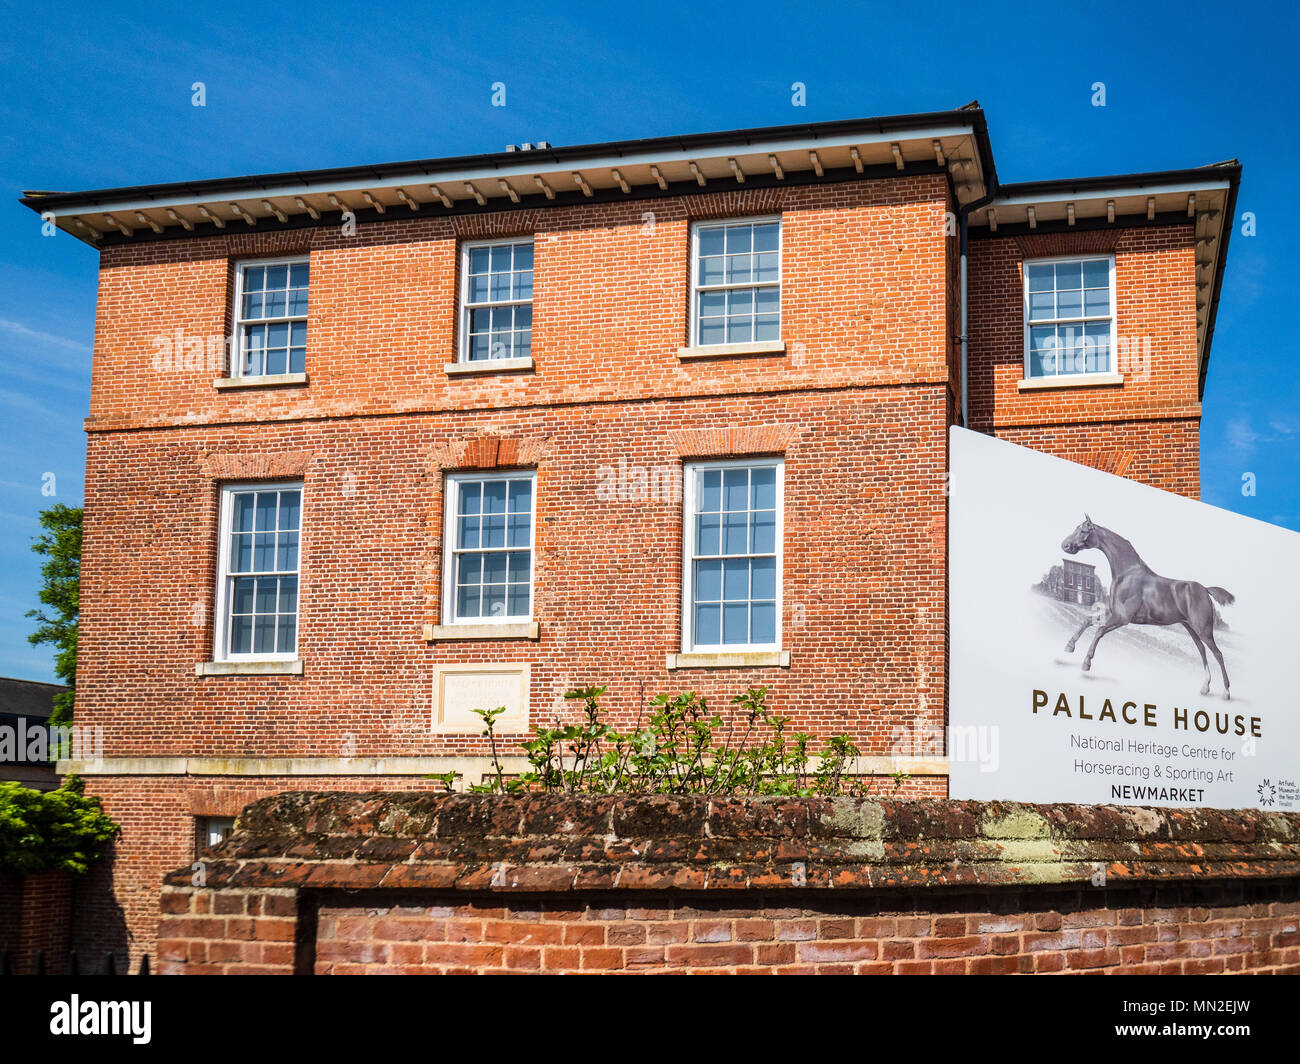 Palace House, National Heritage Centre for Horseracing & Sporting Art, Newmarket. Part of Charles II's sporting palace (arch: William Samwell 1671). Stock Photo